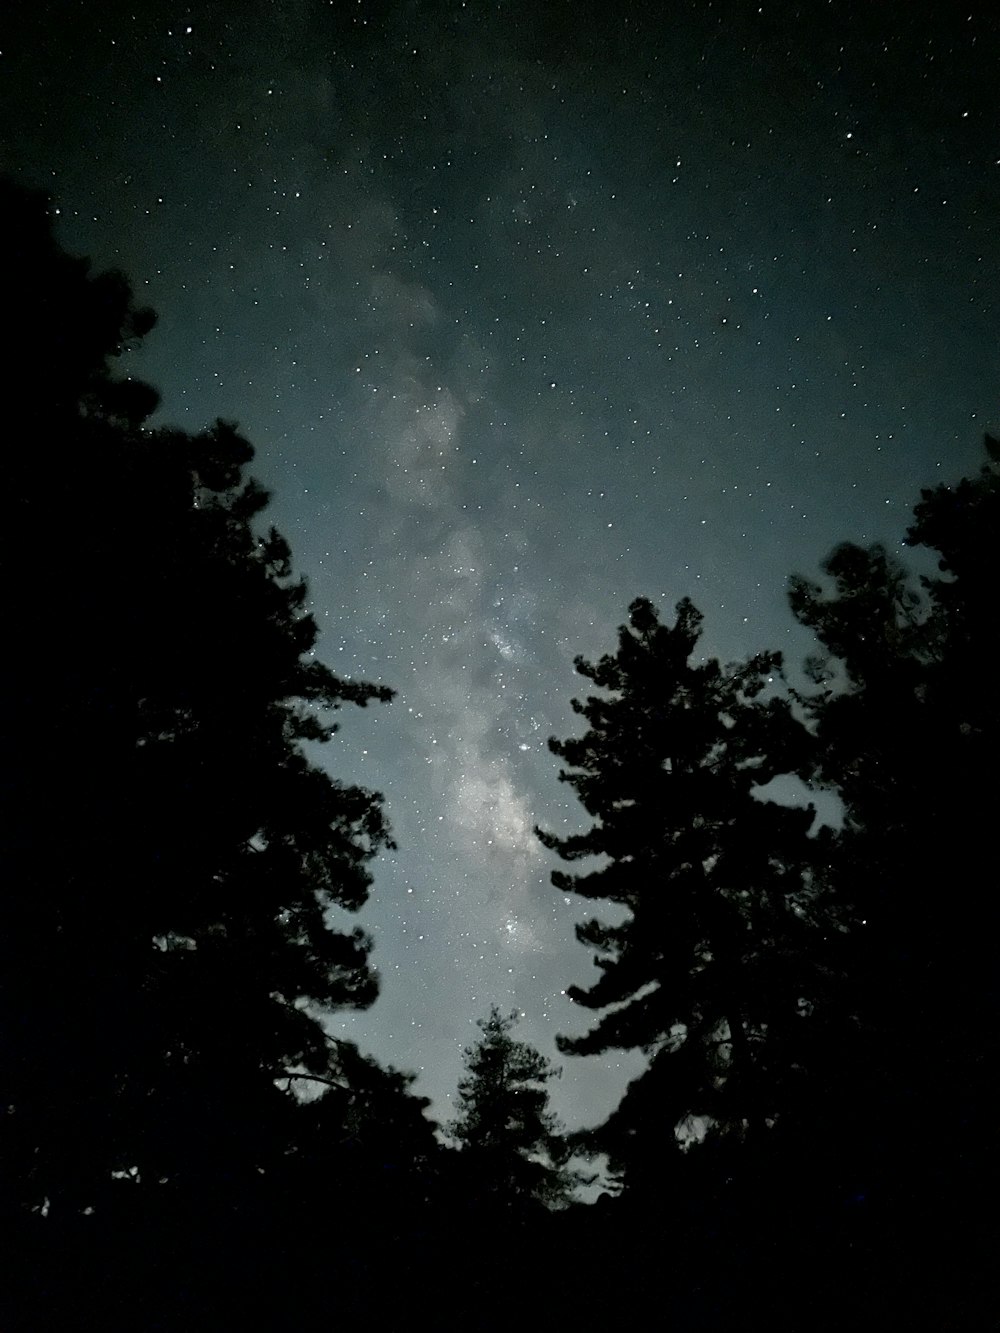 a starry night sky with trees